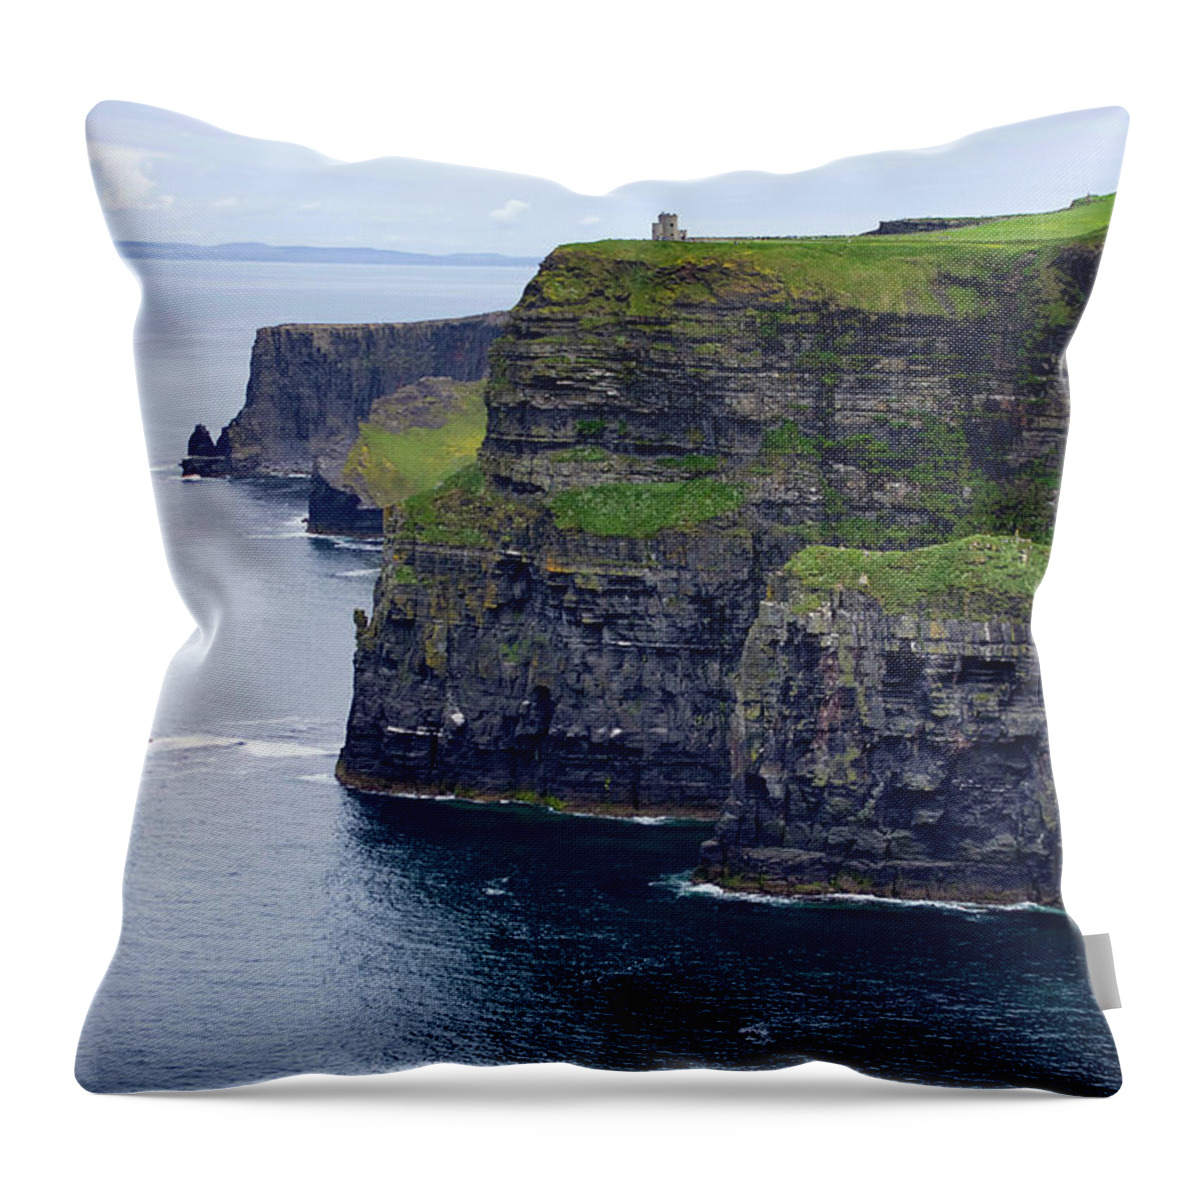 Tranquility Throw Pillow featuring the photograph Cliffs Of Moher by Sebastian Condrea